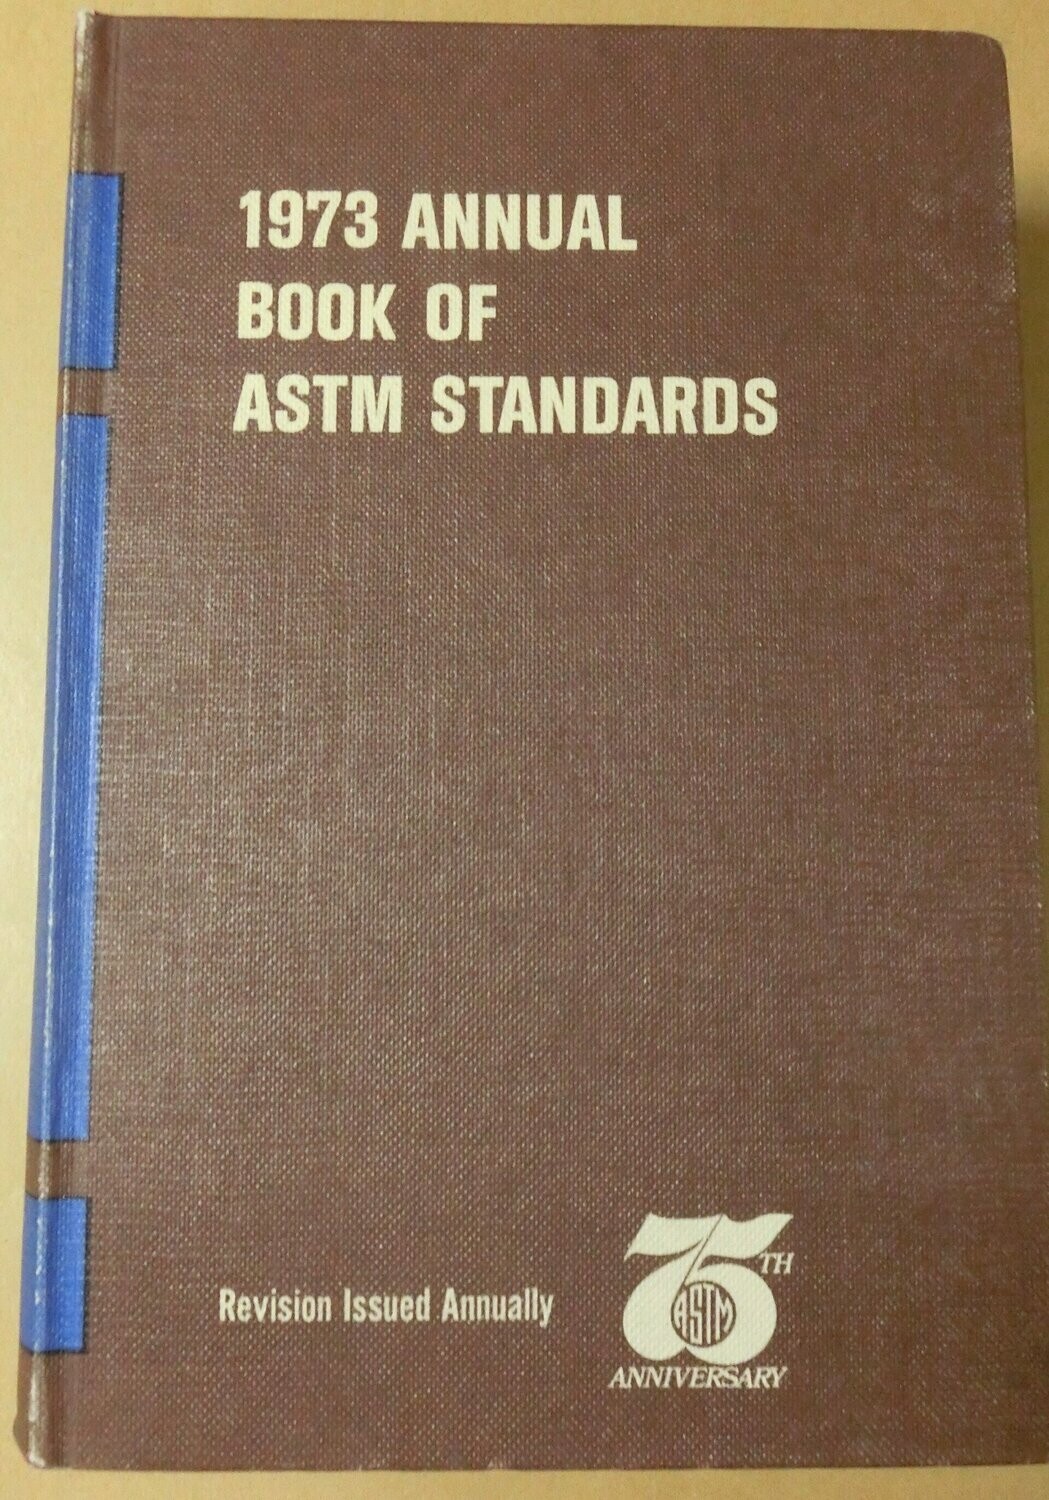 1973 Annual book of ASTM standards part 7, july